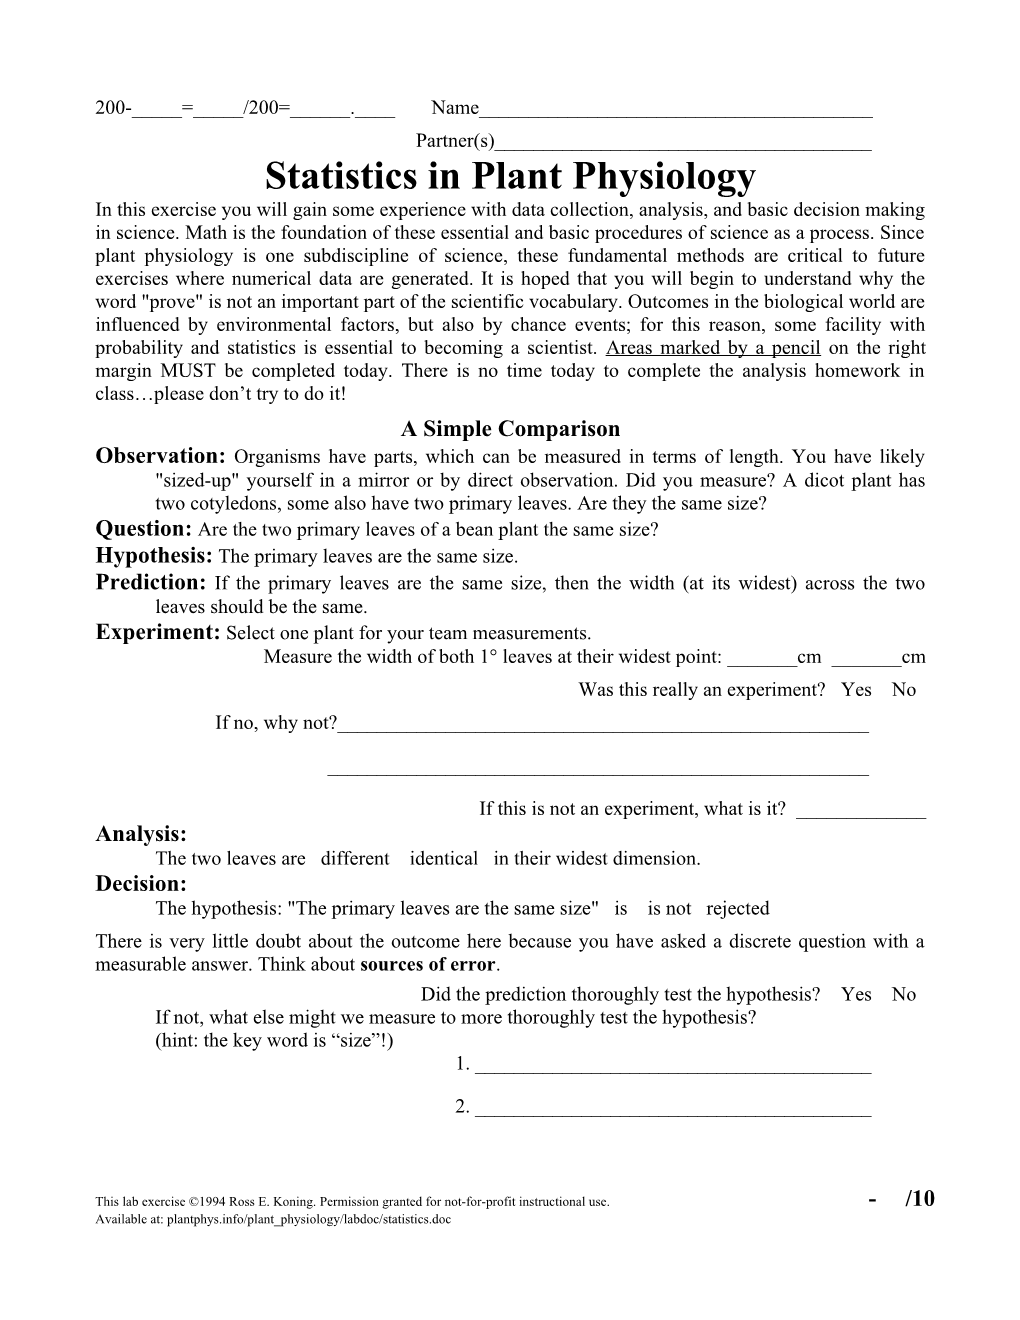 Statistics in Plant Physiology